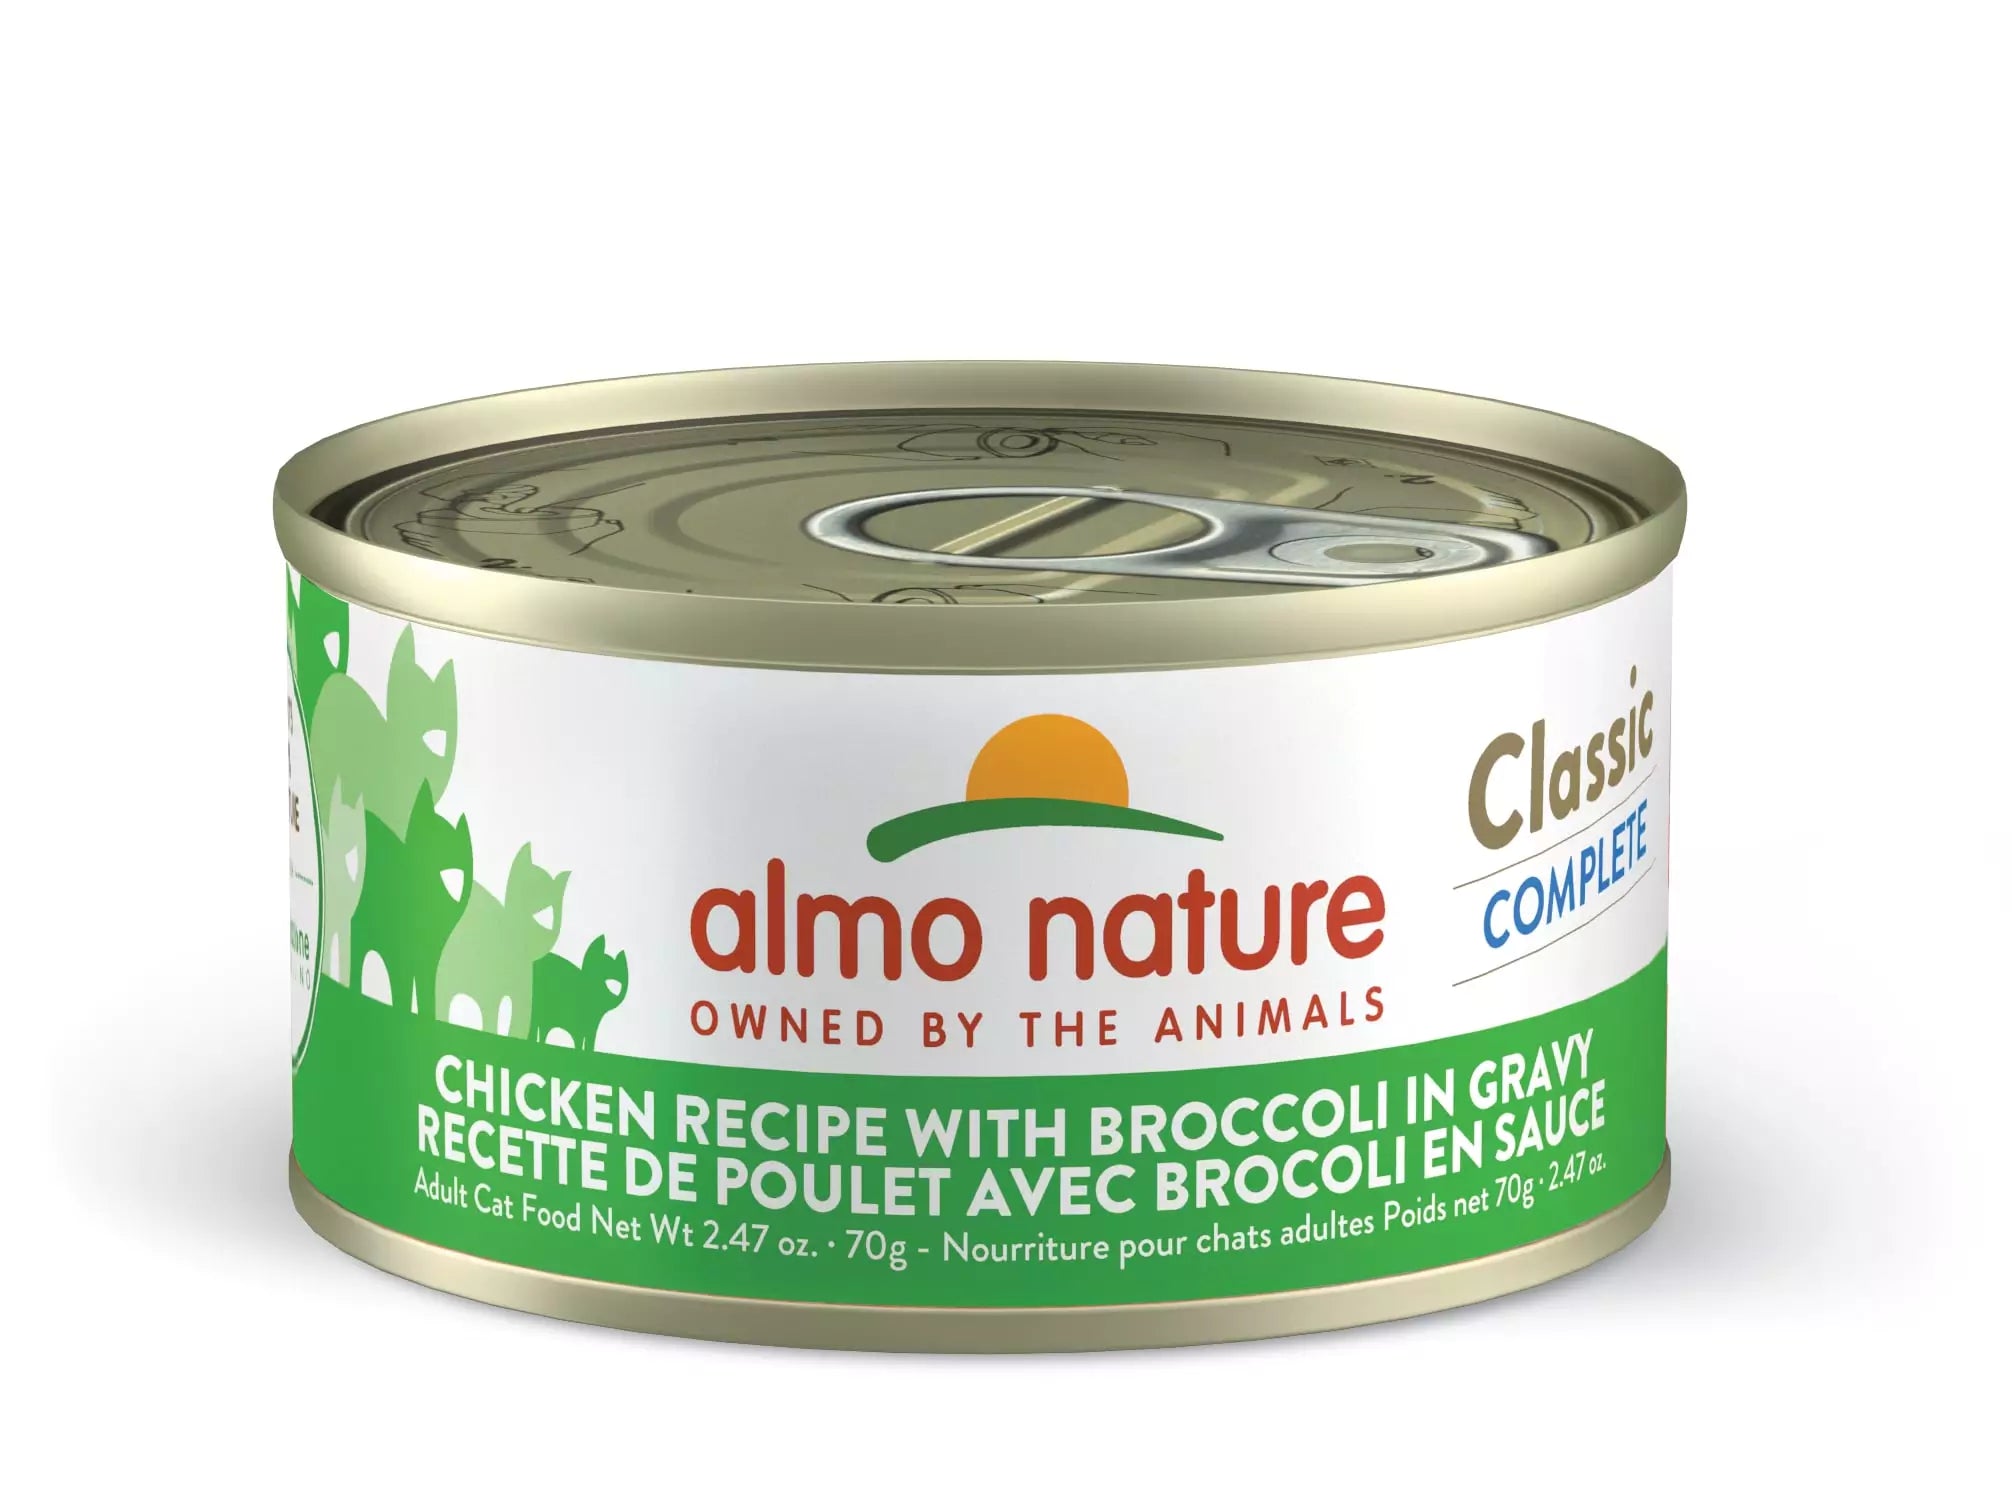 Almo Nature - Classic Complete - Chicken With Broccoli in Gravy (Wet Cat Food)